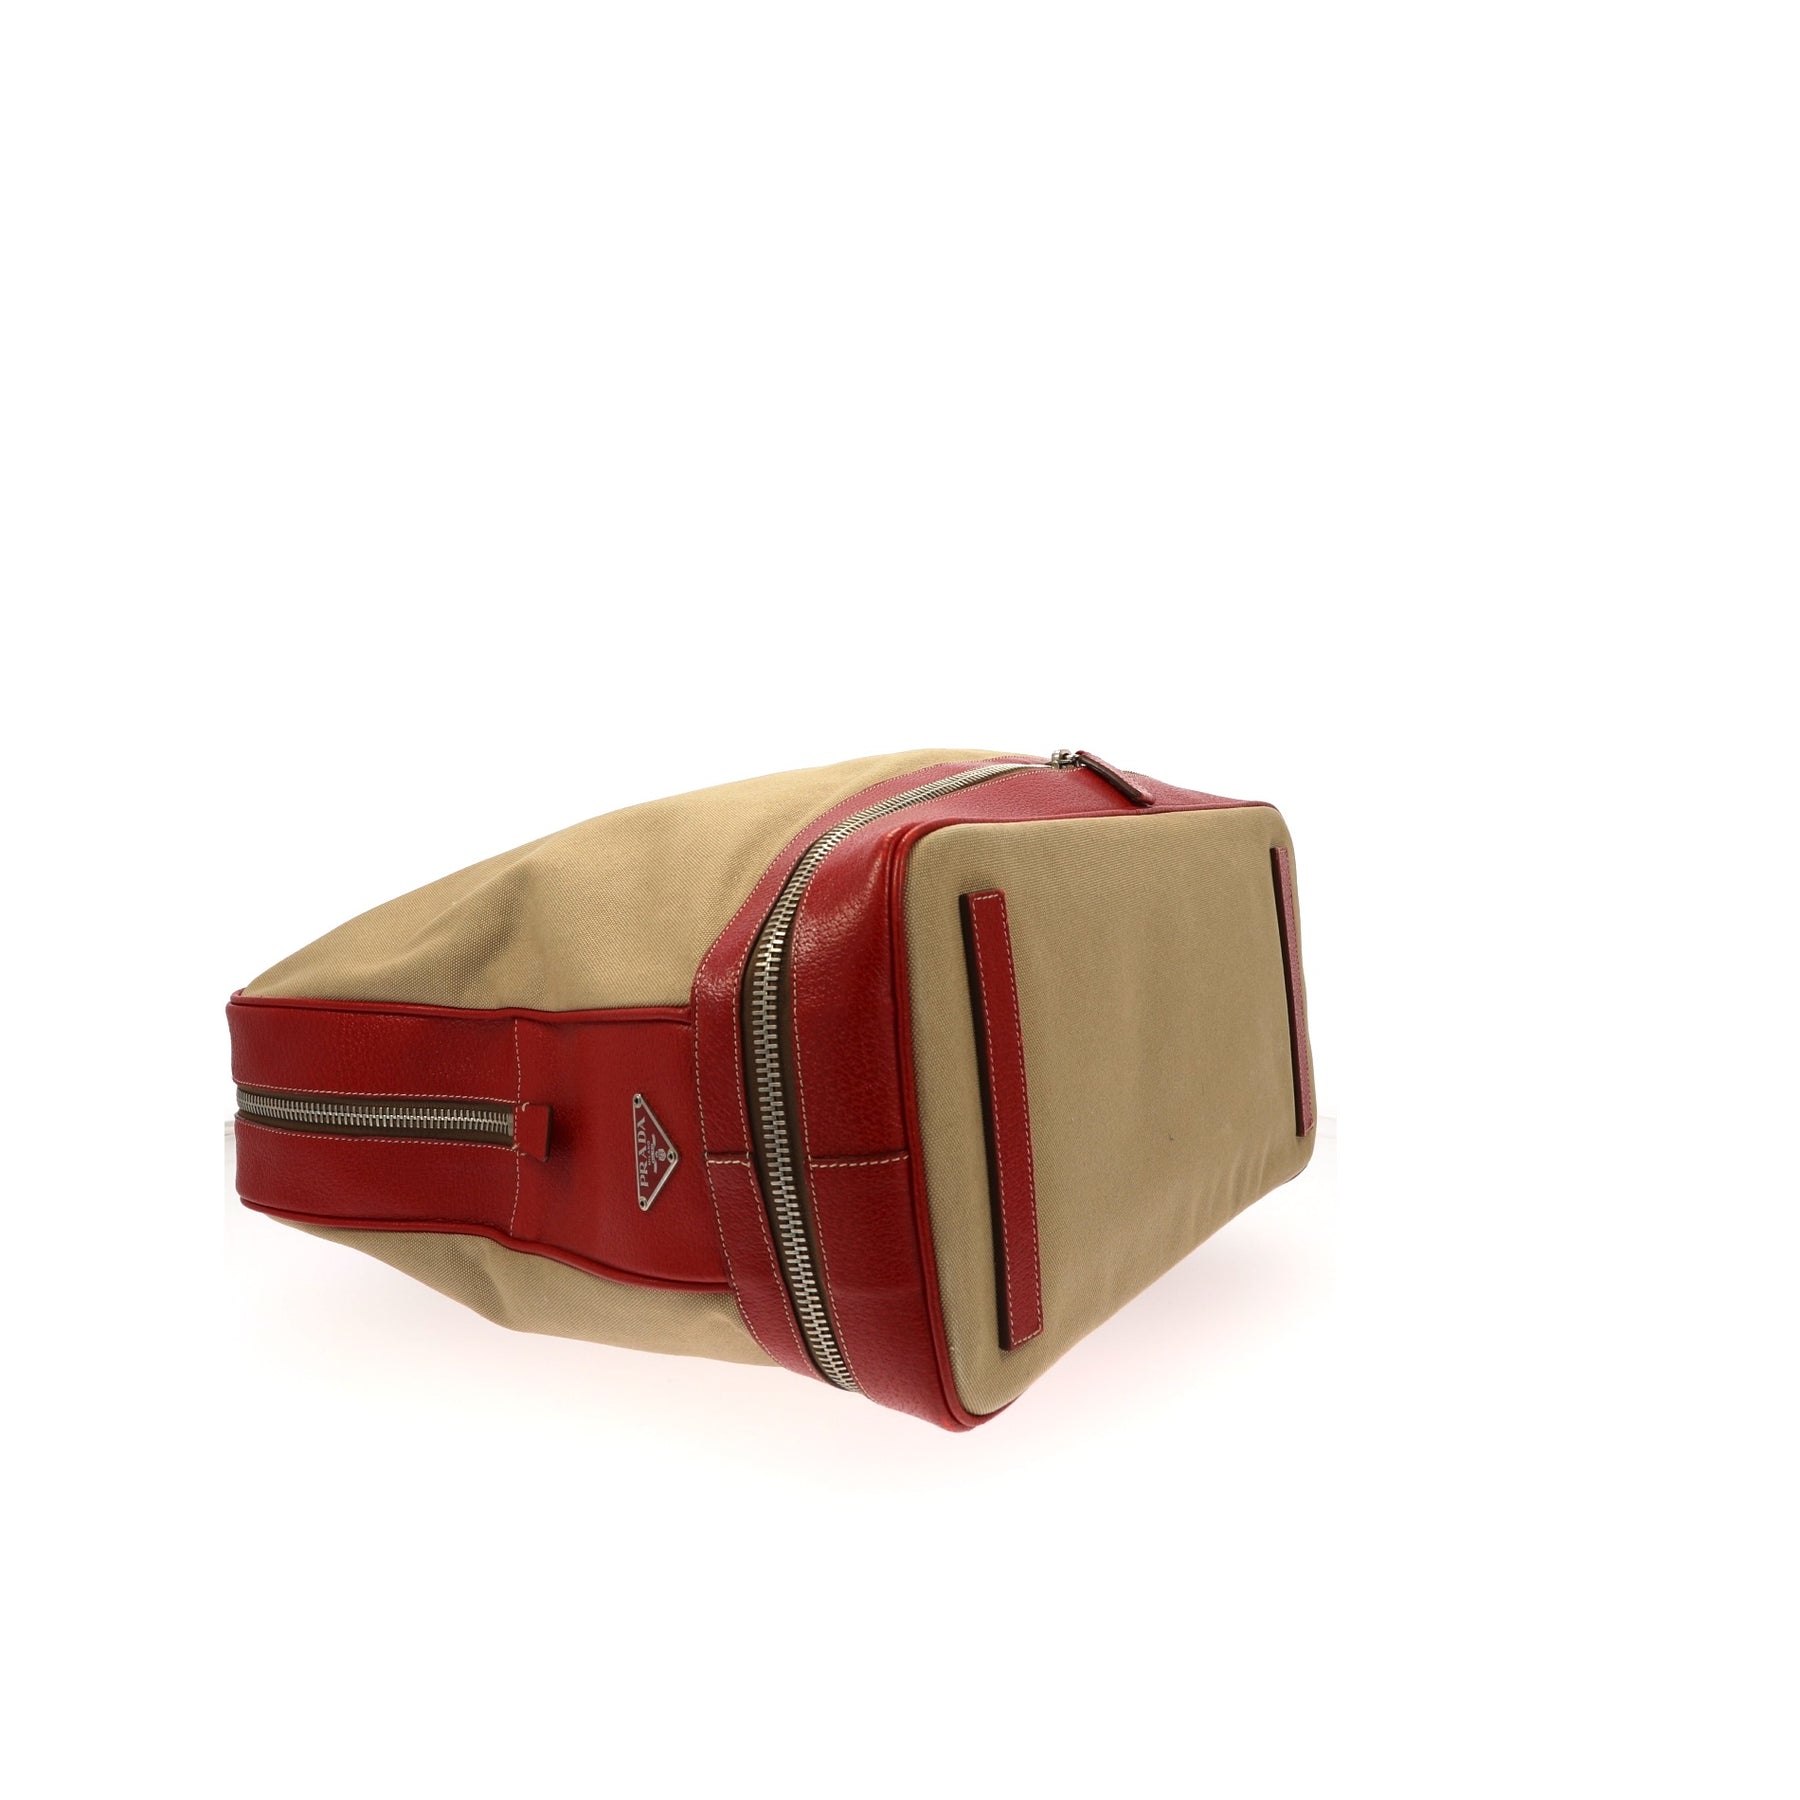 Prada Travel bag in Red Leather – Fancy Lux